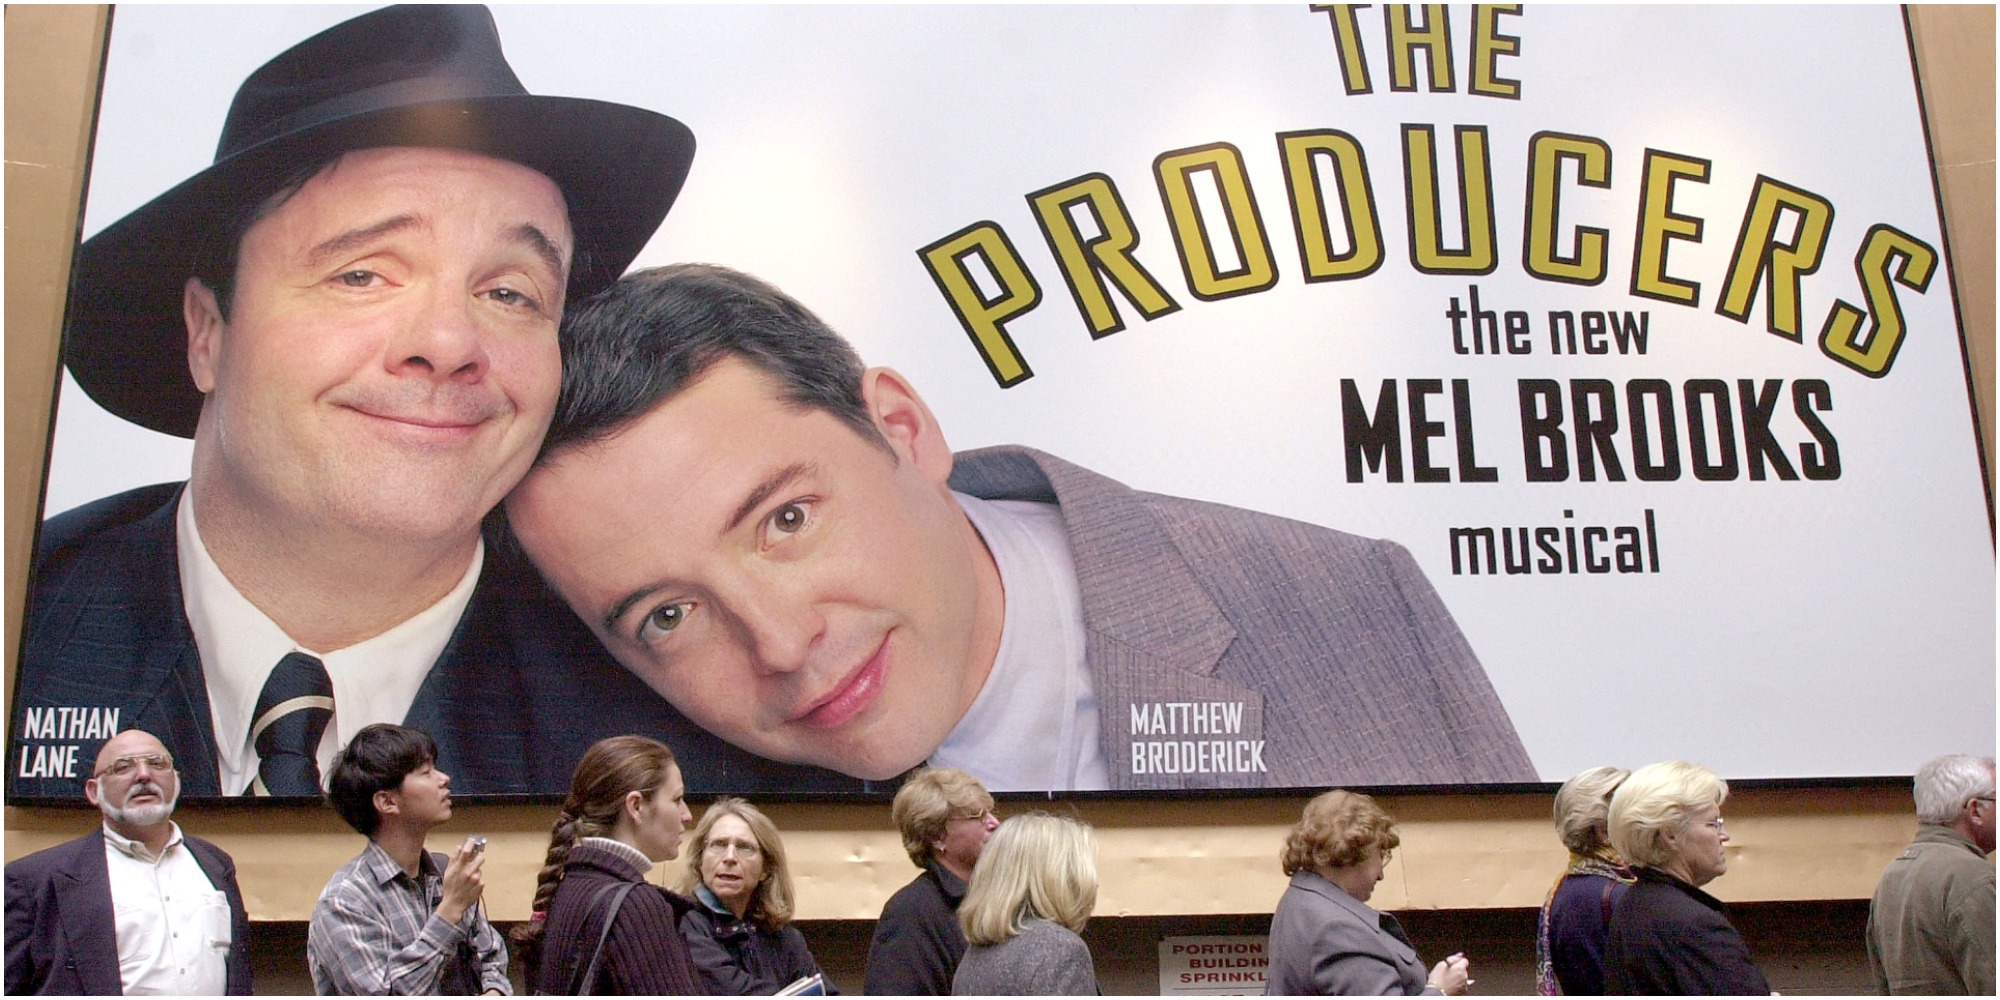 "The Producers: a new Mel Brooks musical" is the most awarded musical in Tony history.